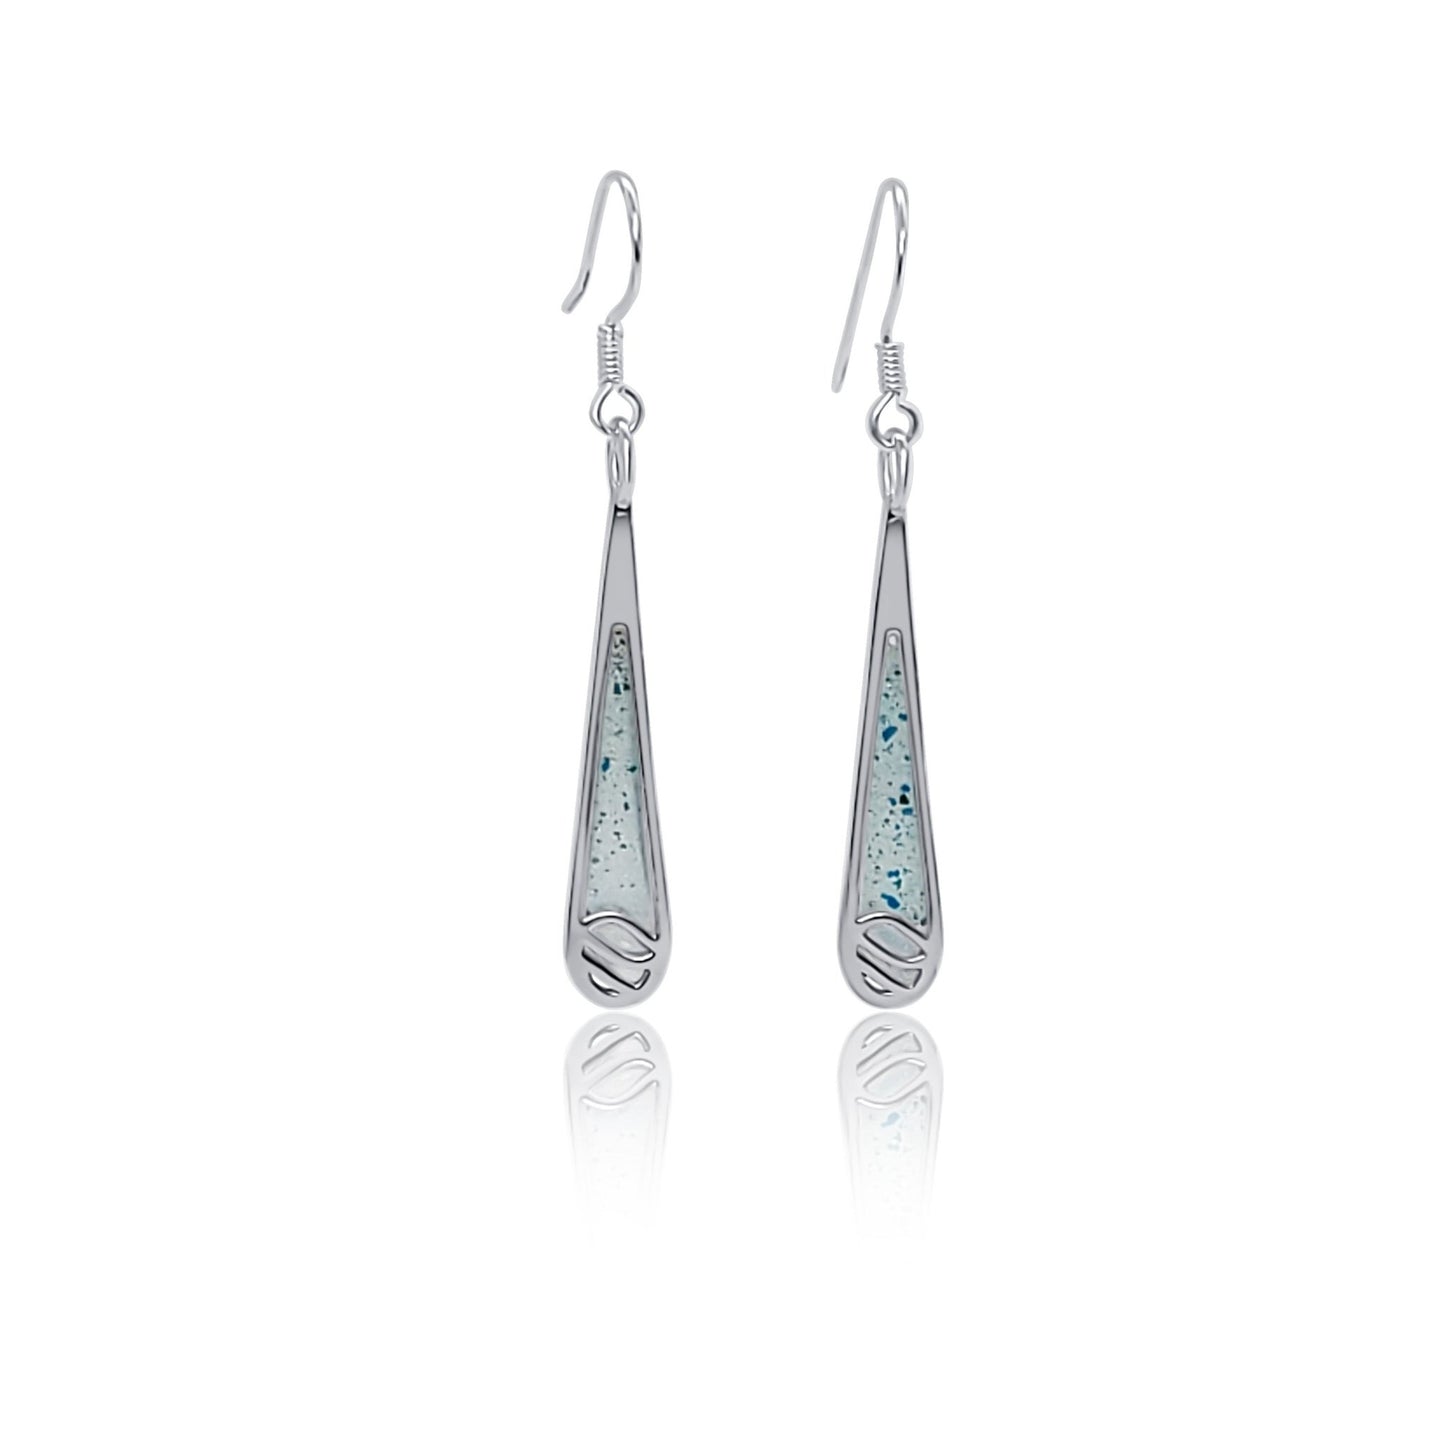 Indra silver raindrop earrings coloured blue with turquoise and resin inlay